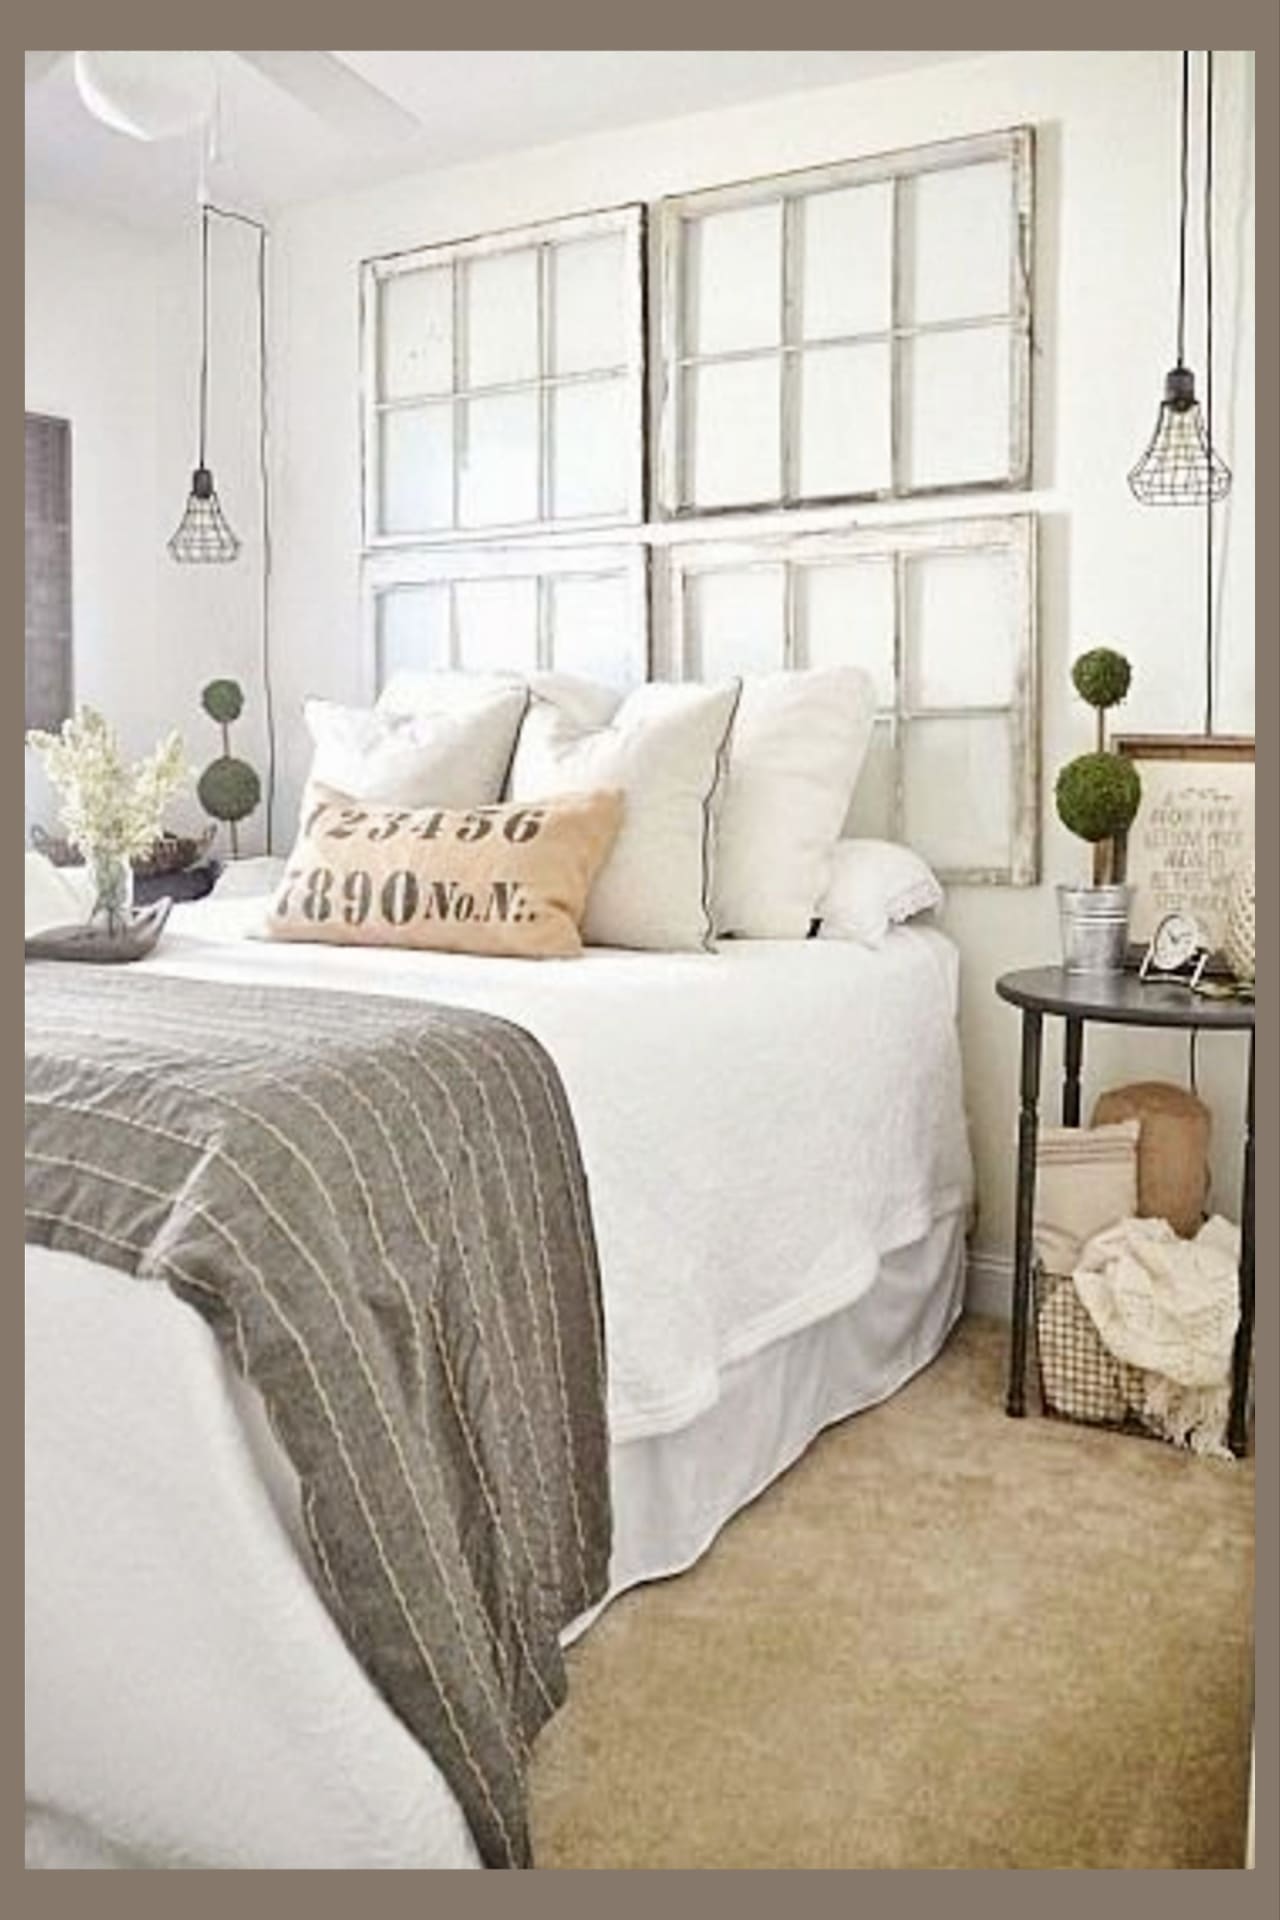 Farmhouse decor on a budget - farmhouse bedroom decorating ideas - use old farmhouse windows and window frames instead of a headboard on the wall behind your bed to get farmhouse look on a budget